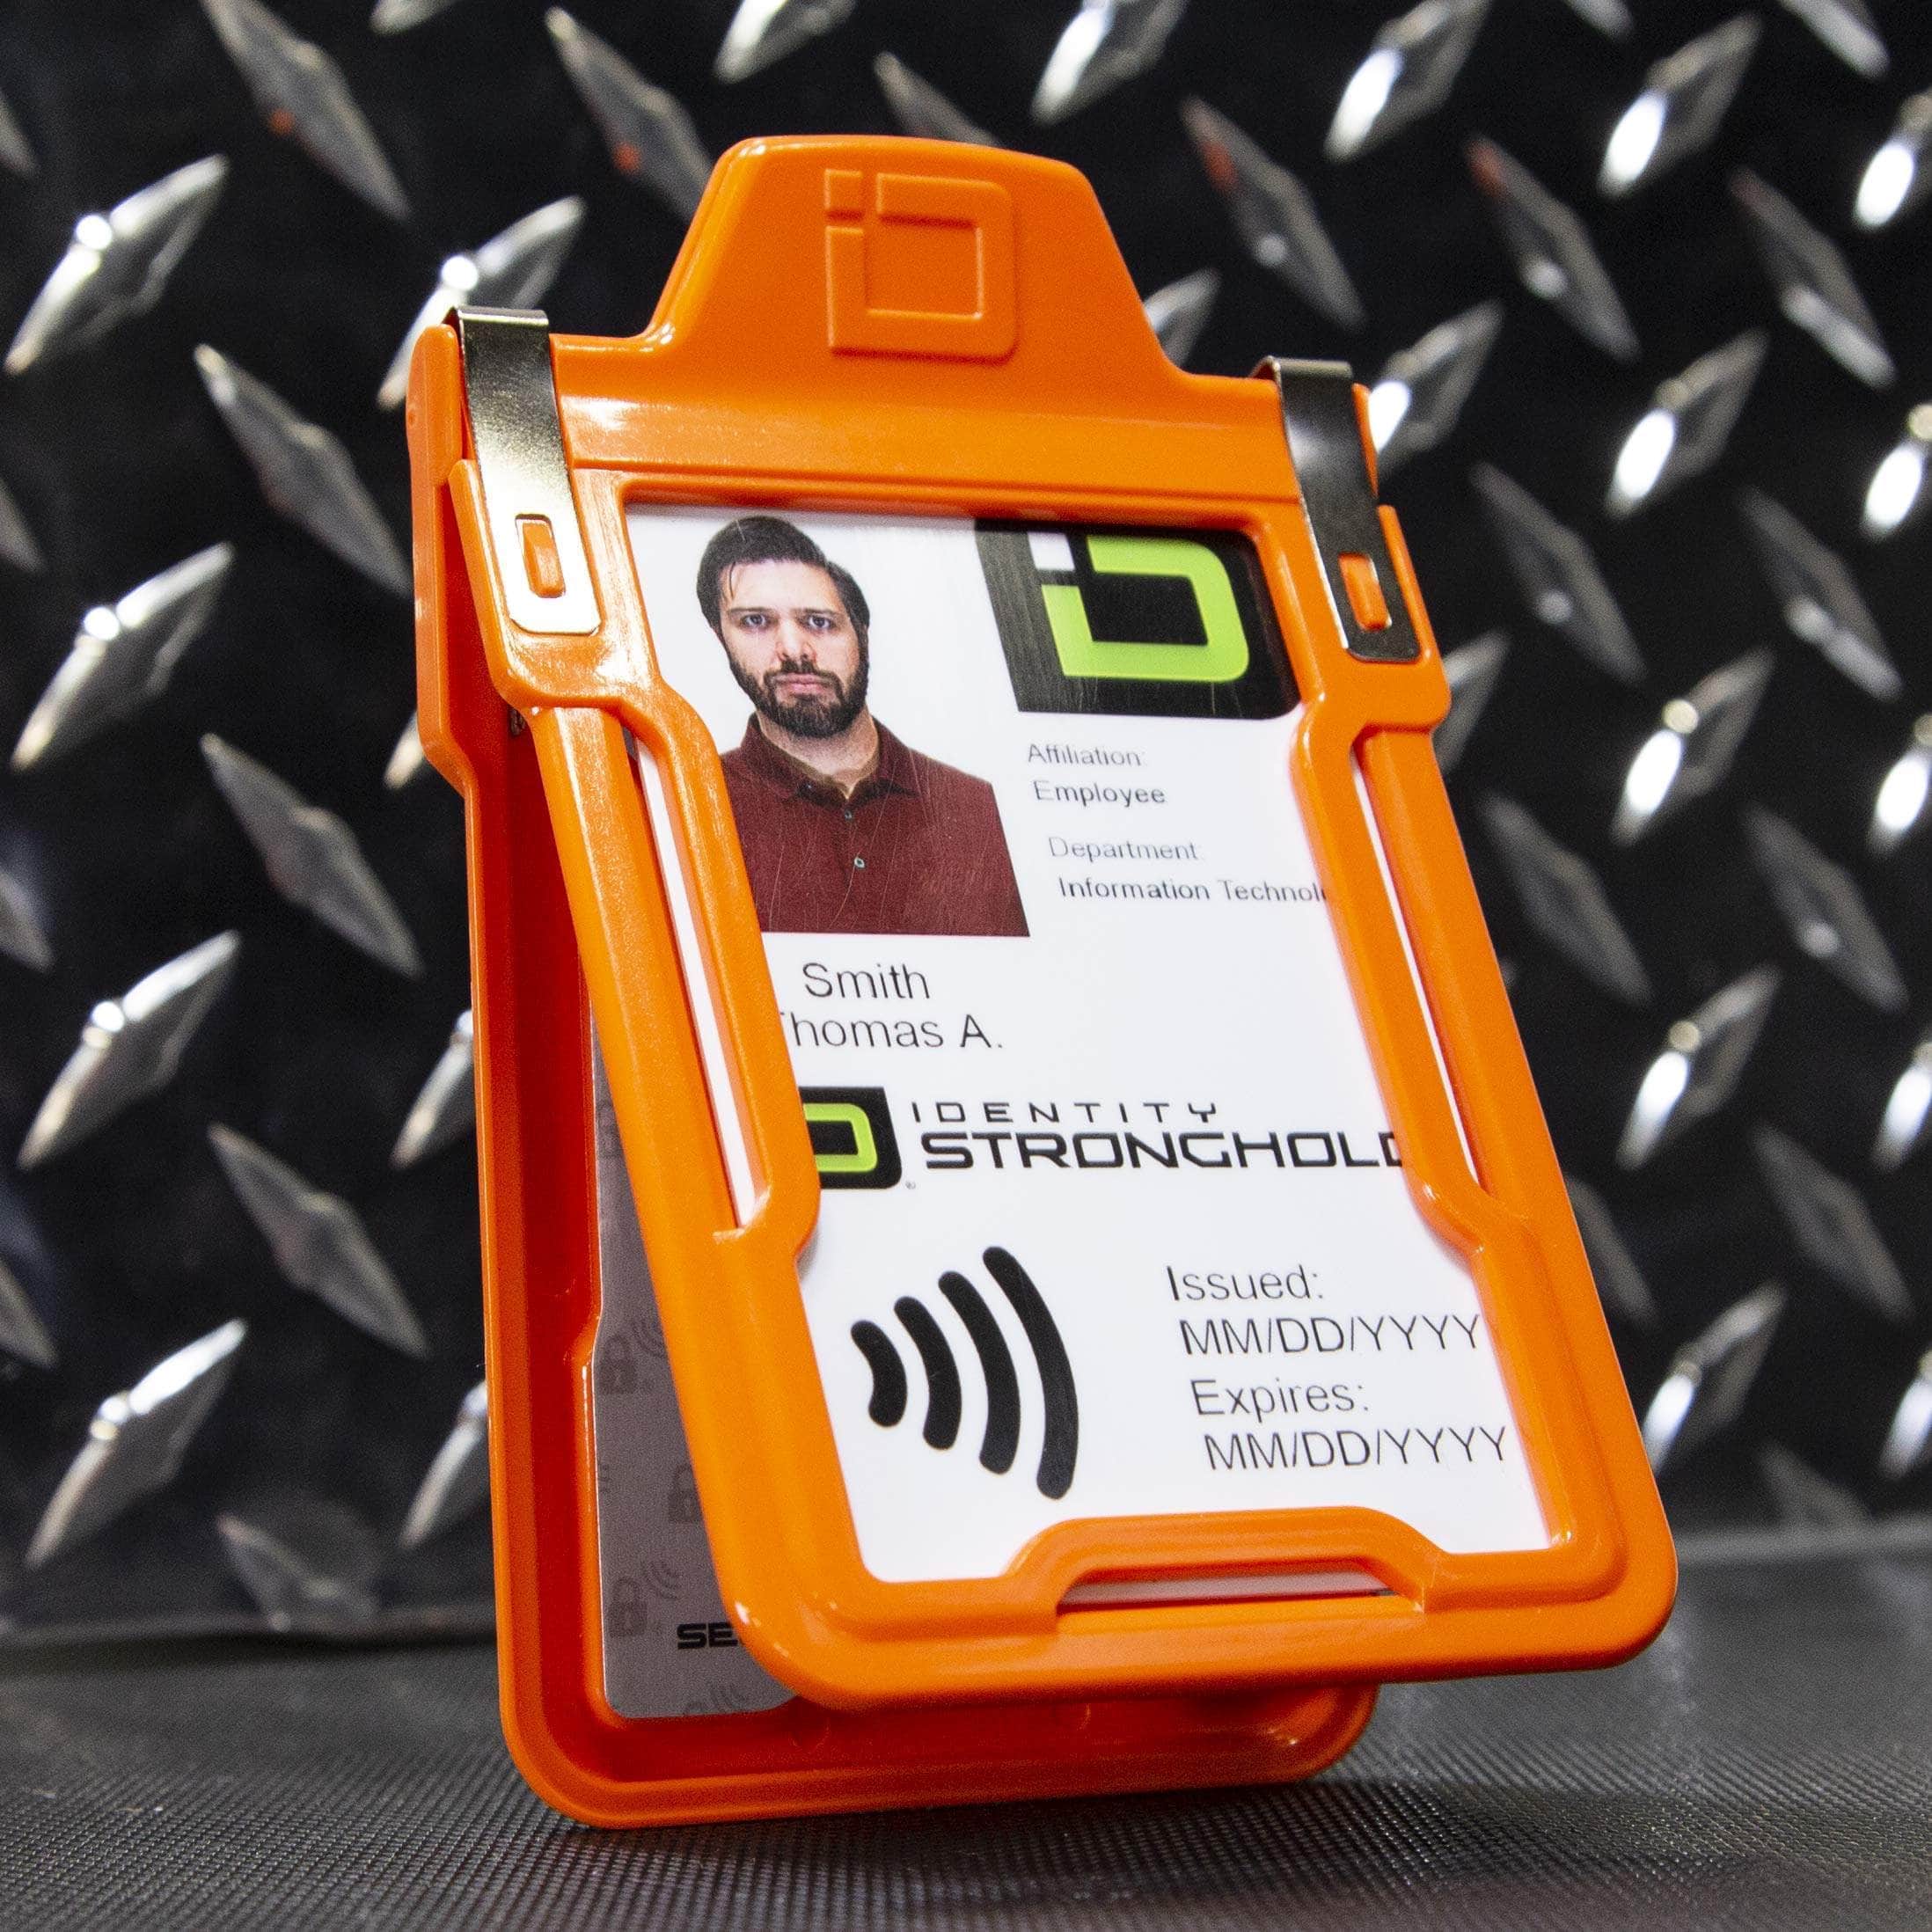 RFID Blocker ID Card Holder - Two Card Vertical - Clear HK-102 at Security  Imaging.com